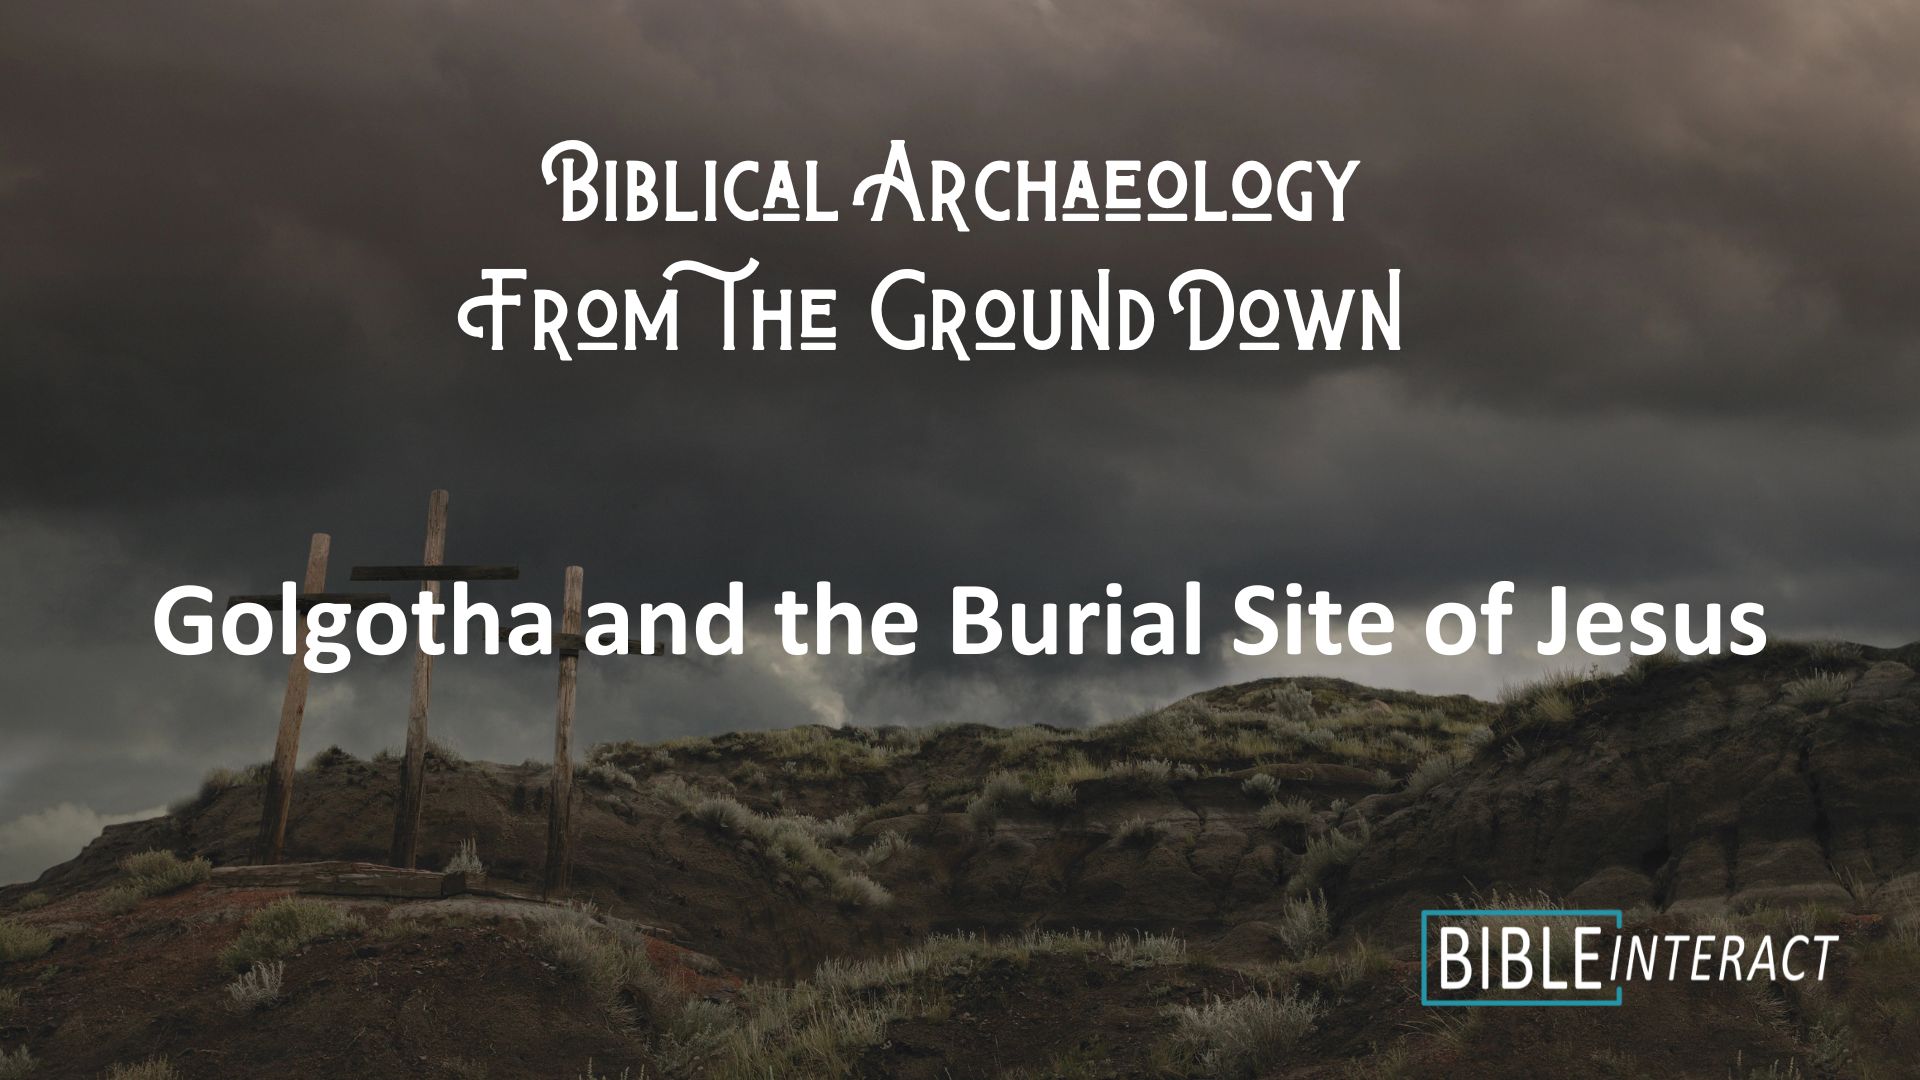 ▶️ Biblical Archaeology From the Ground Down: Golgotha and the Burial Site of Jesus